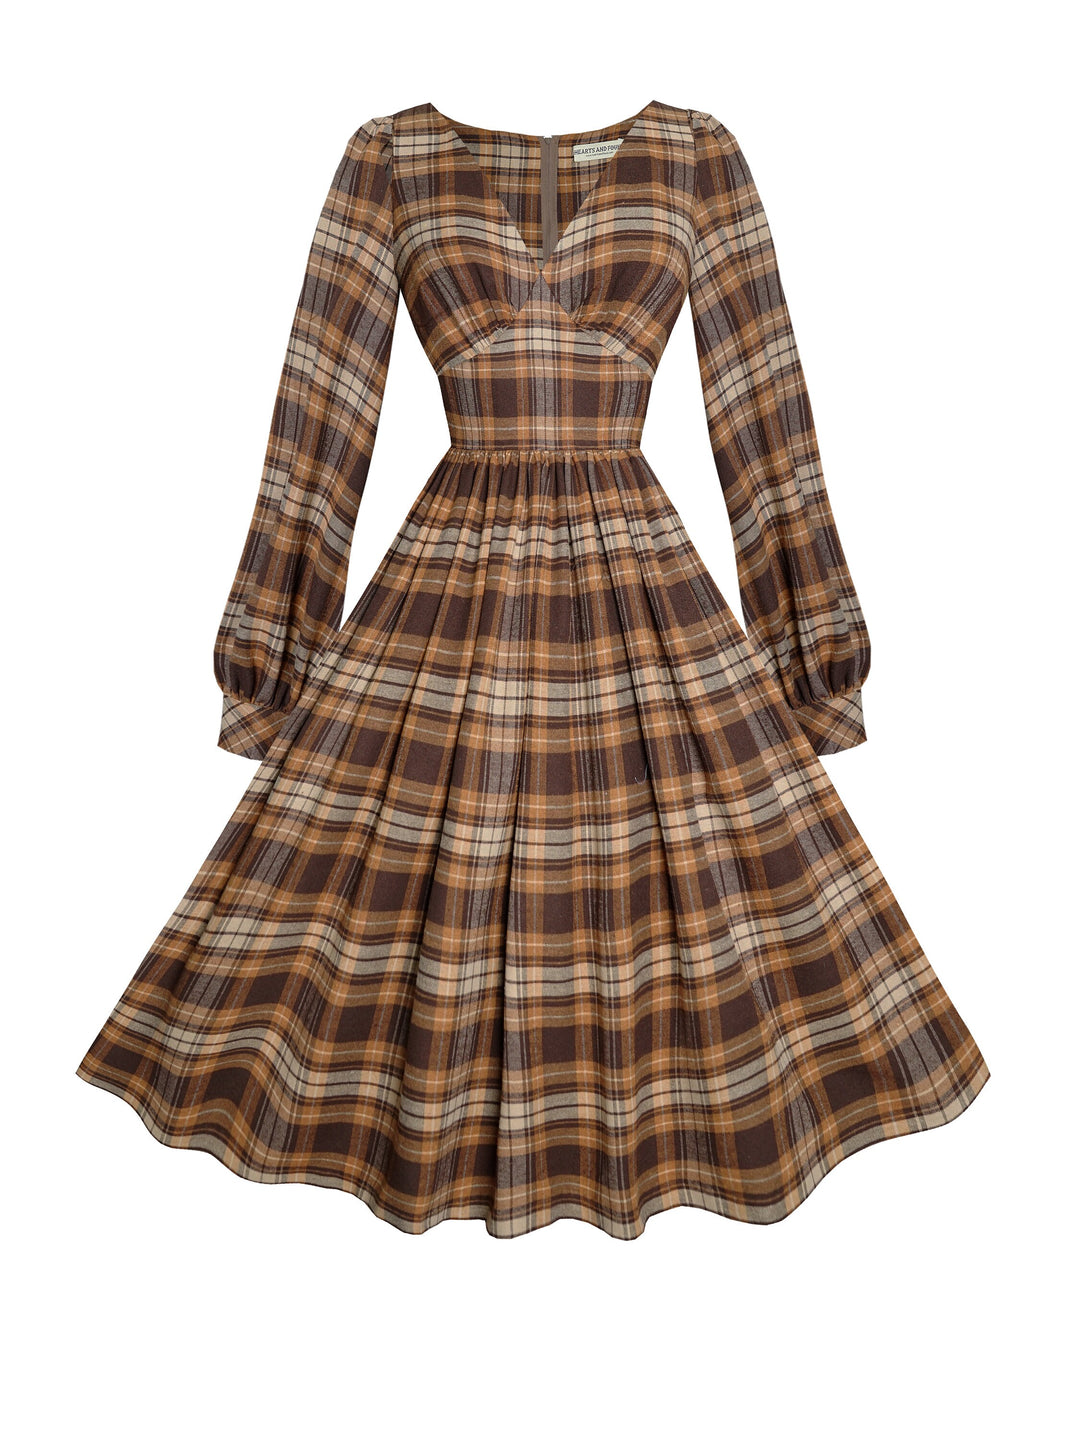 MTO - Harlow Dress in "Chalet Plaid"